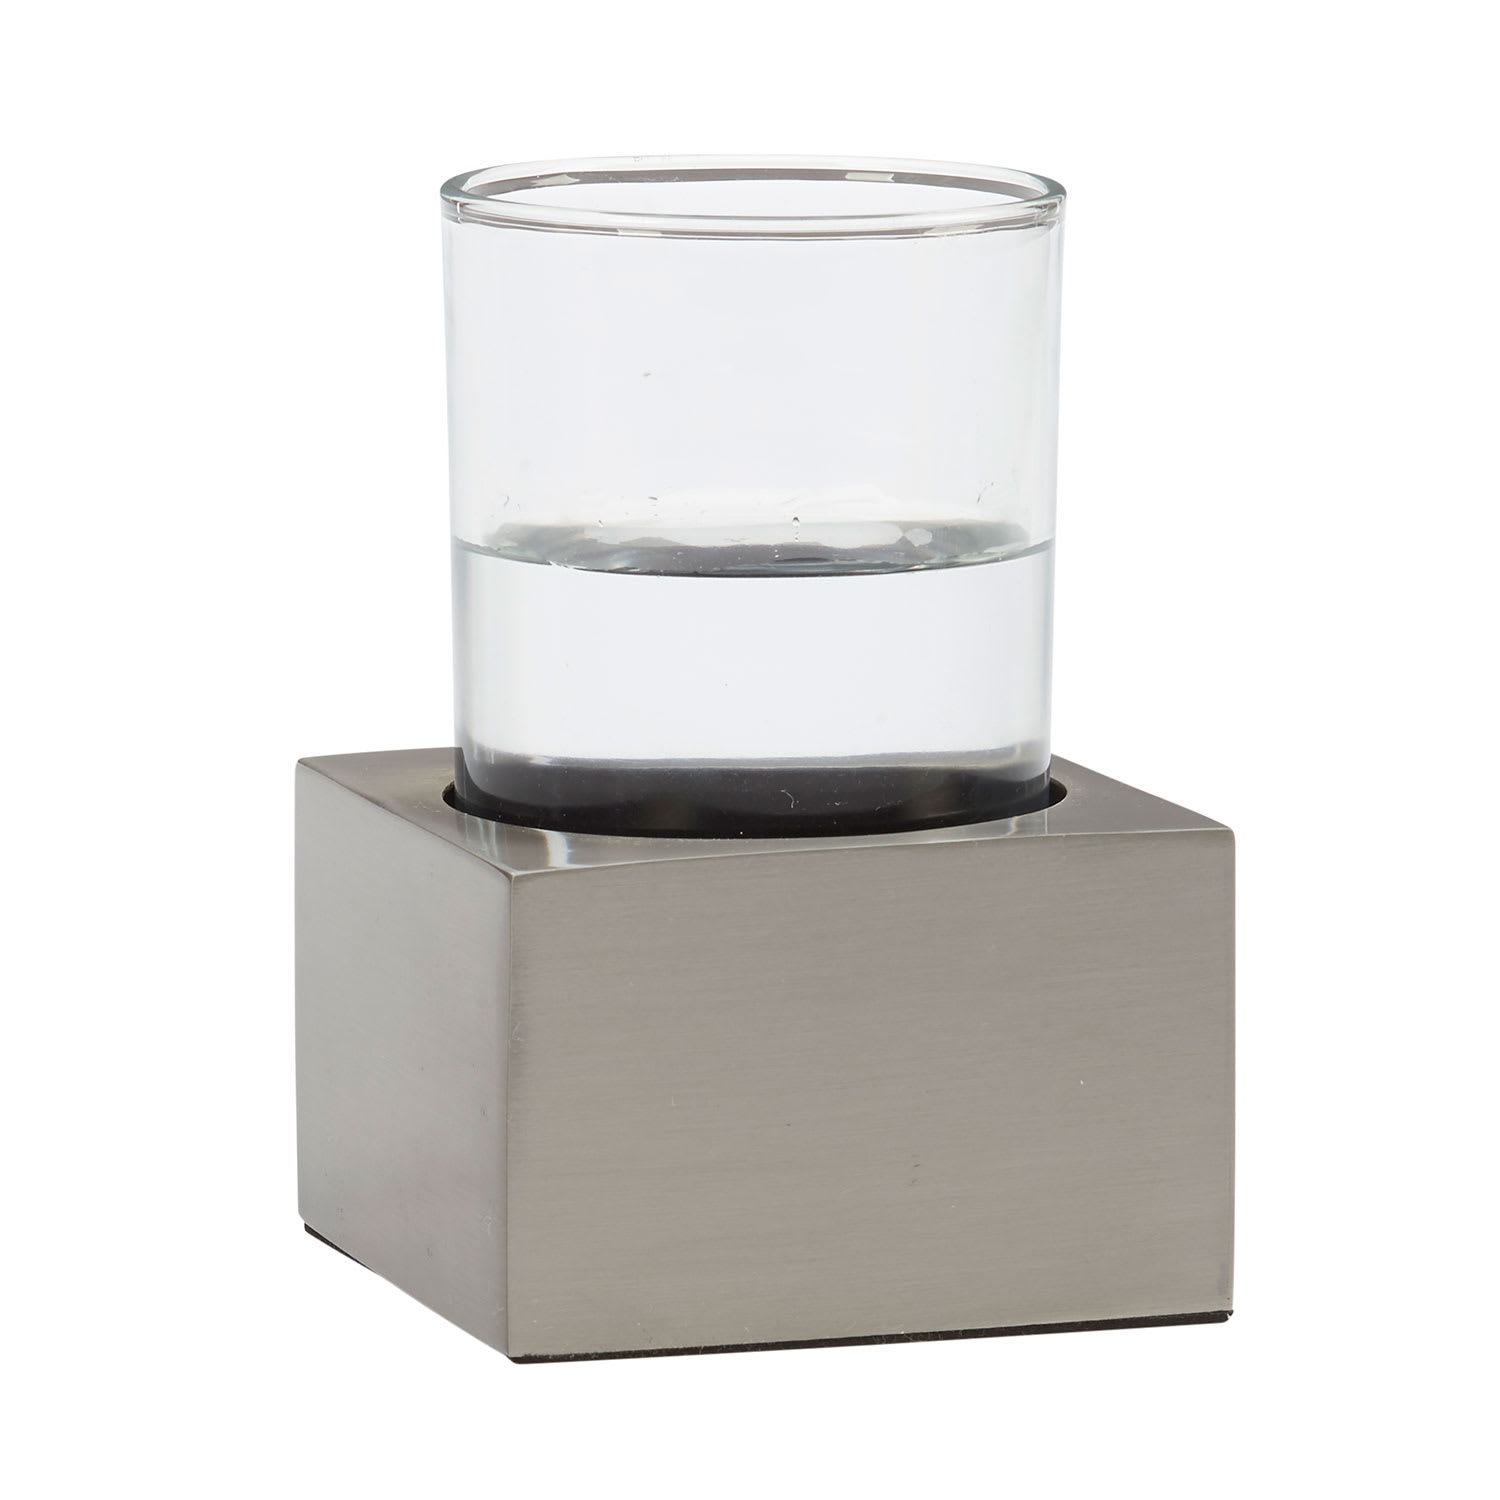 Stainless Steel Cubed Bath Tumbler